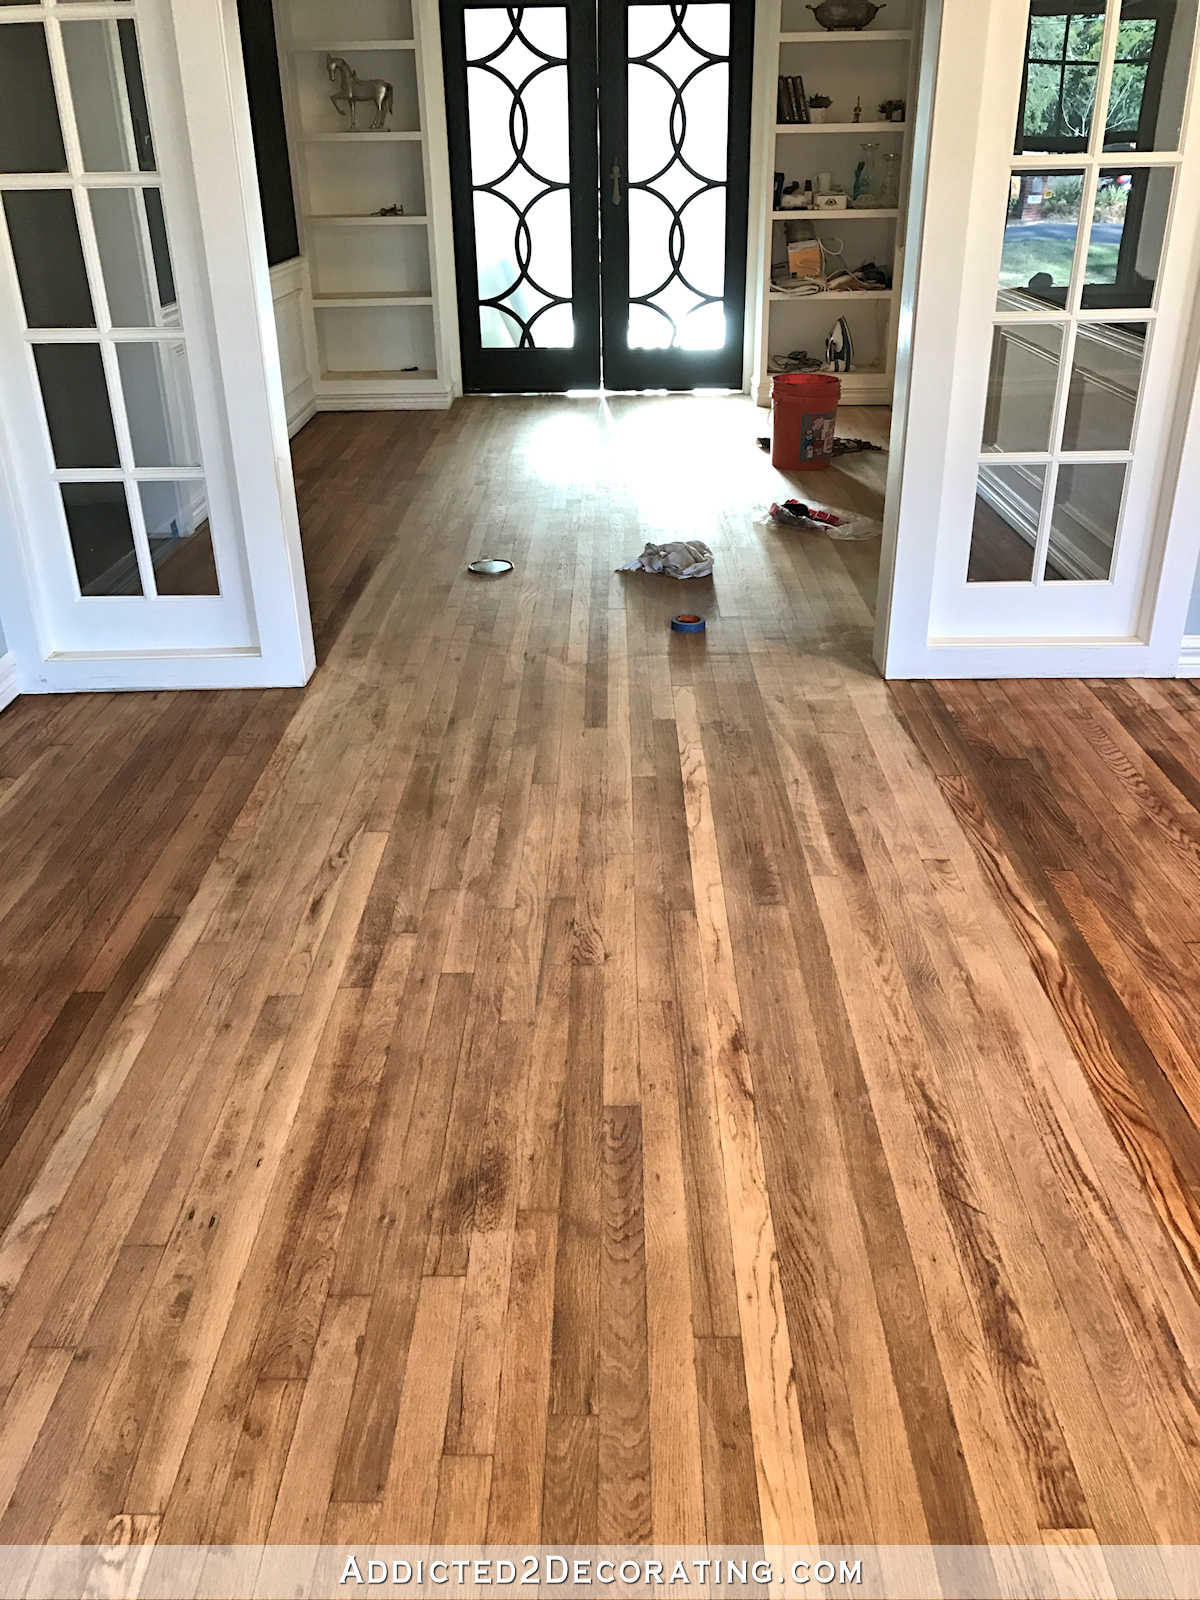 28 Stylish Different Types Of Hardwood Floors In House 2024 free download different types of hardwood floors in house of adventures in staining my red oak hardwood floors products process for staining red oak hardwood floors 5 music room wood conditioner